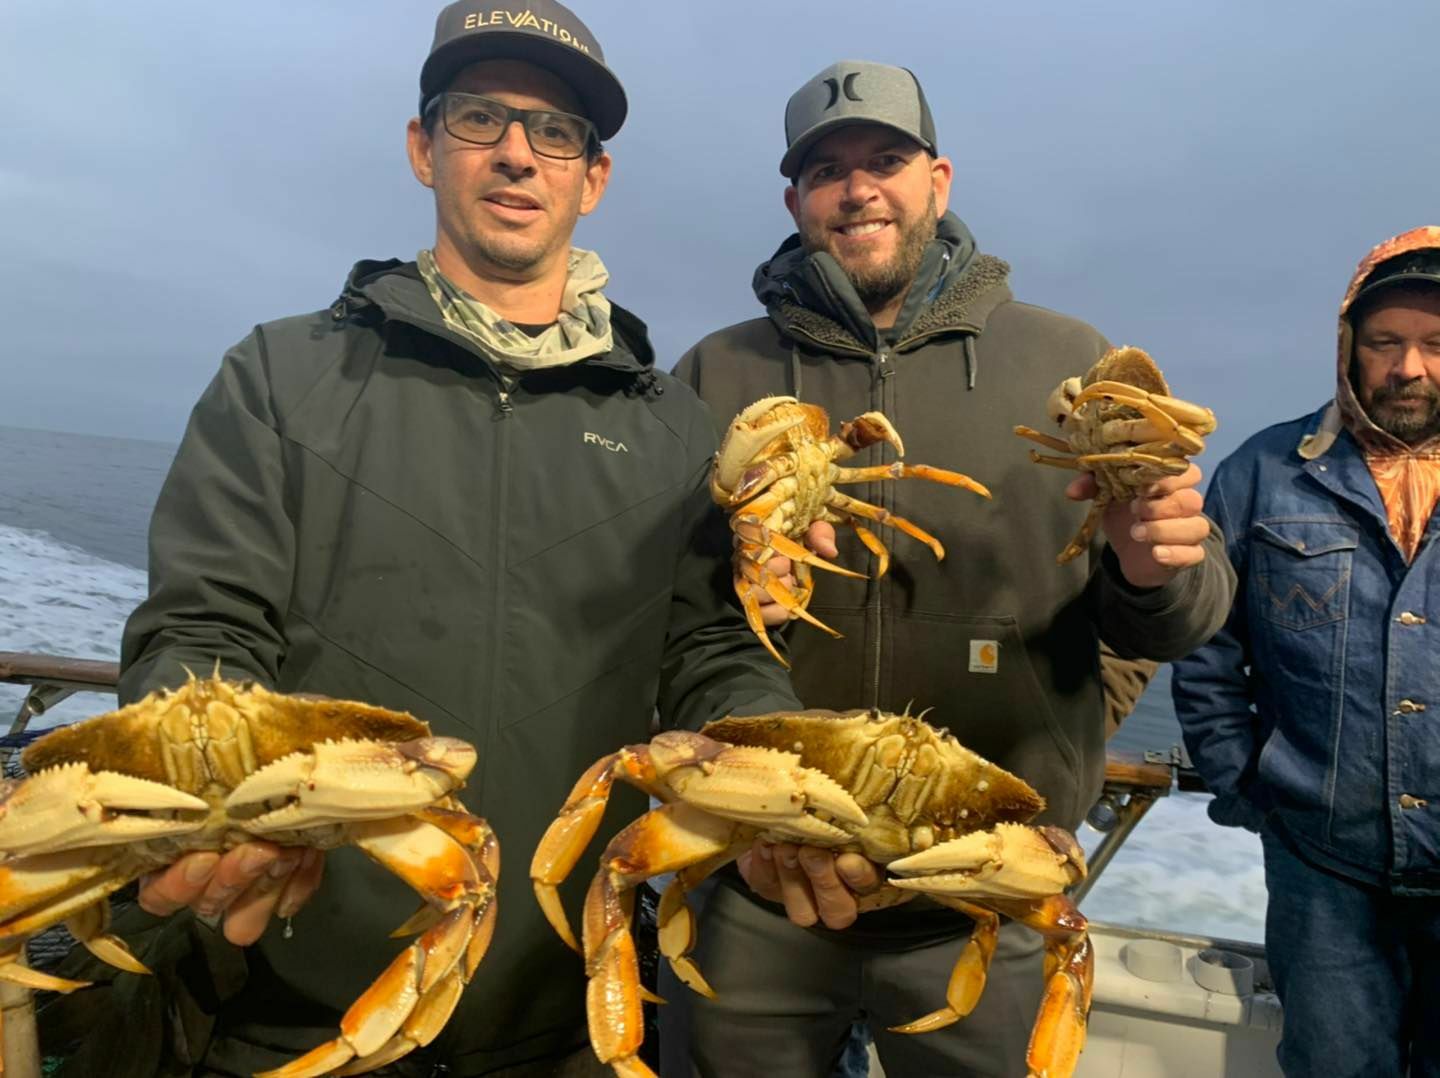 Solid crab and rockfish!